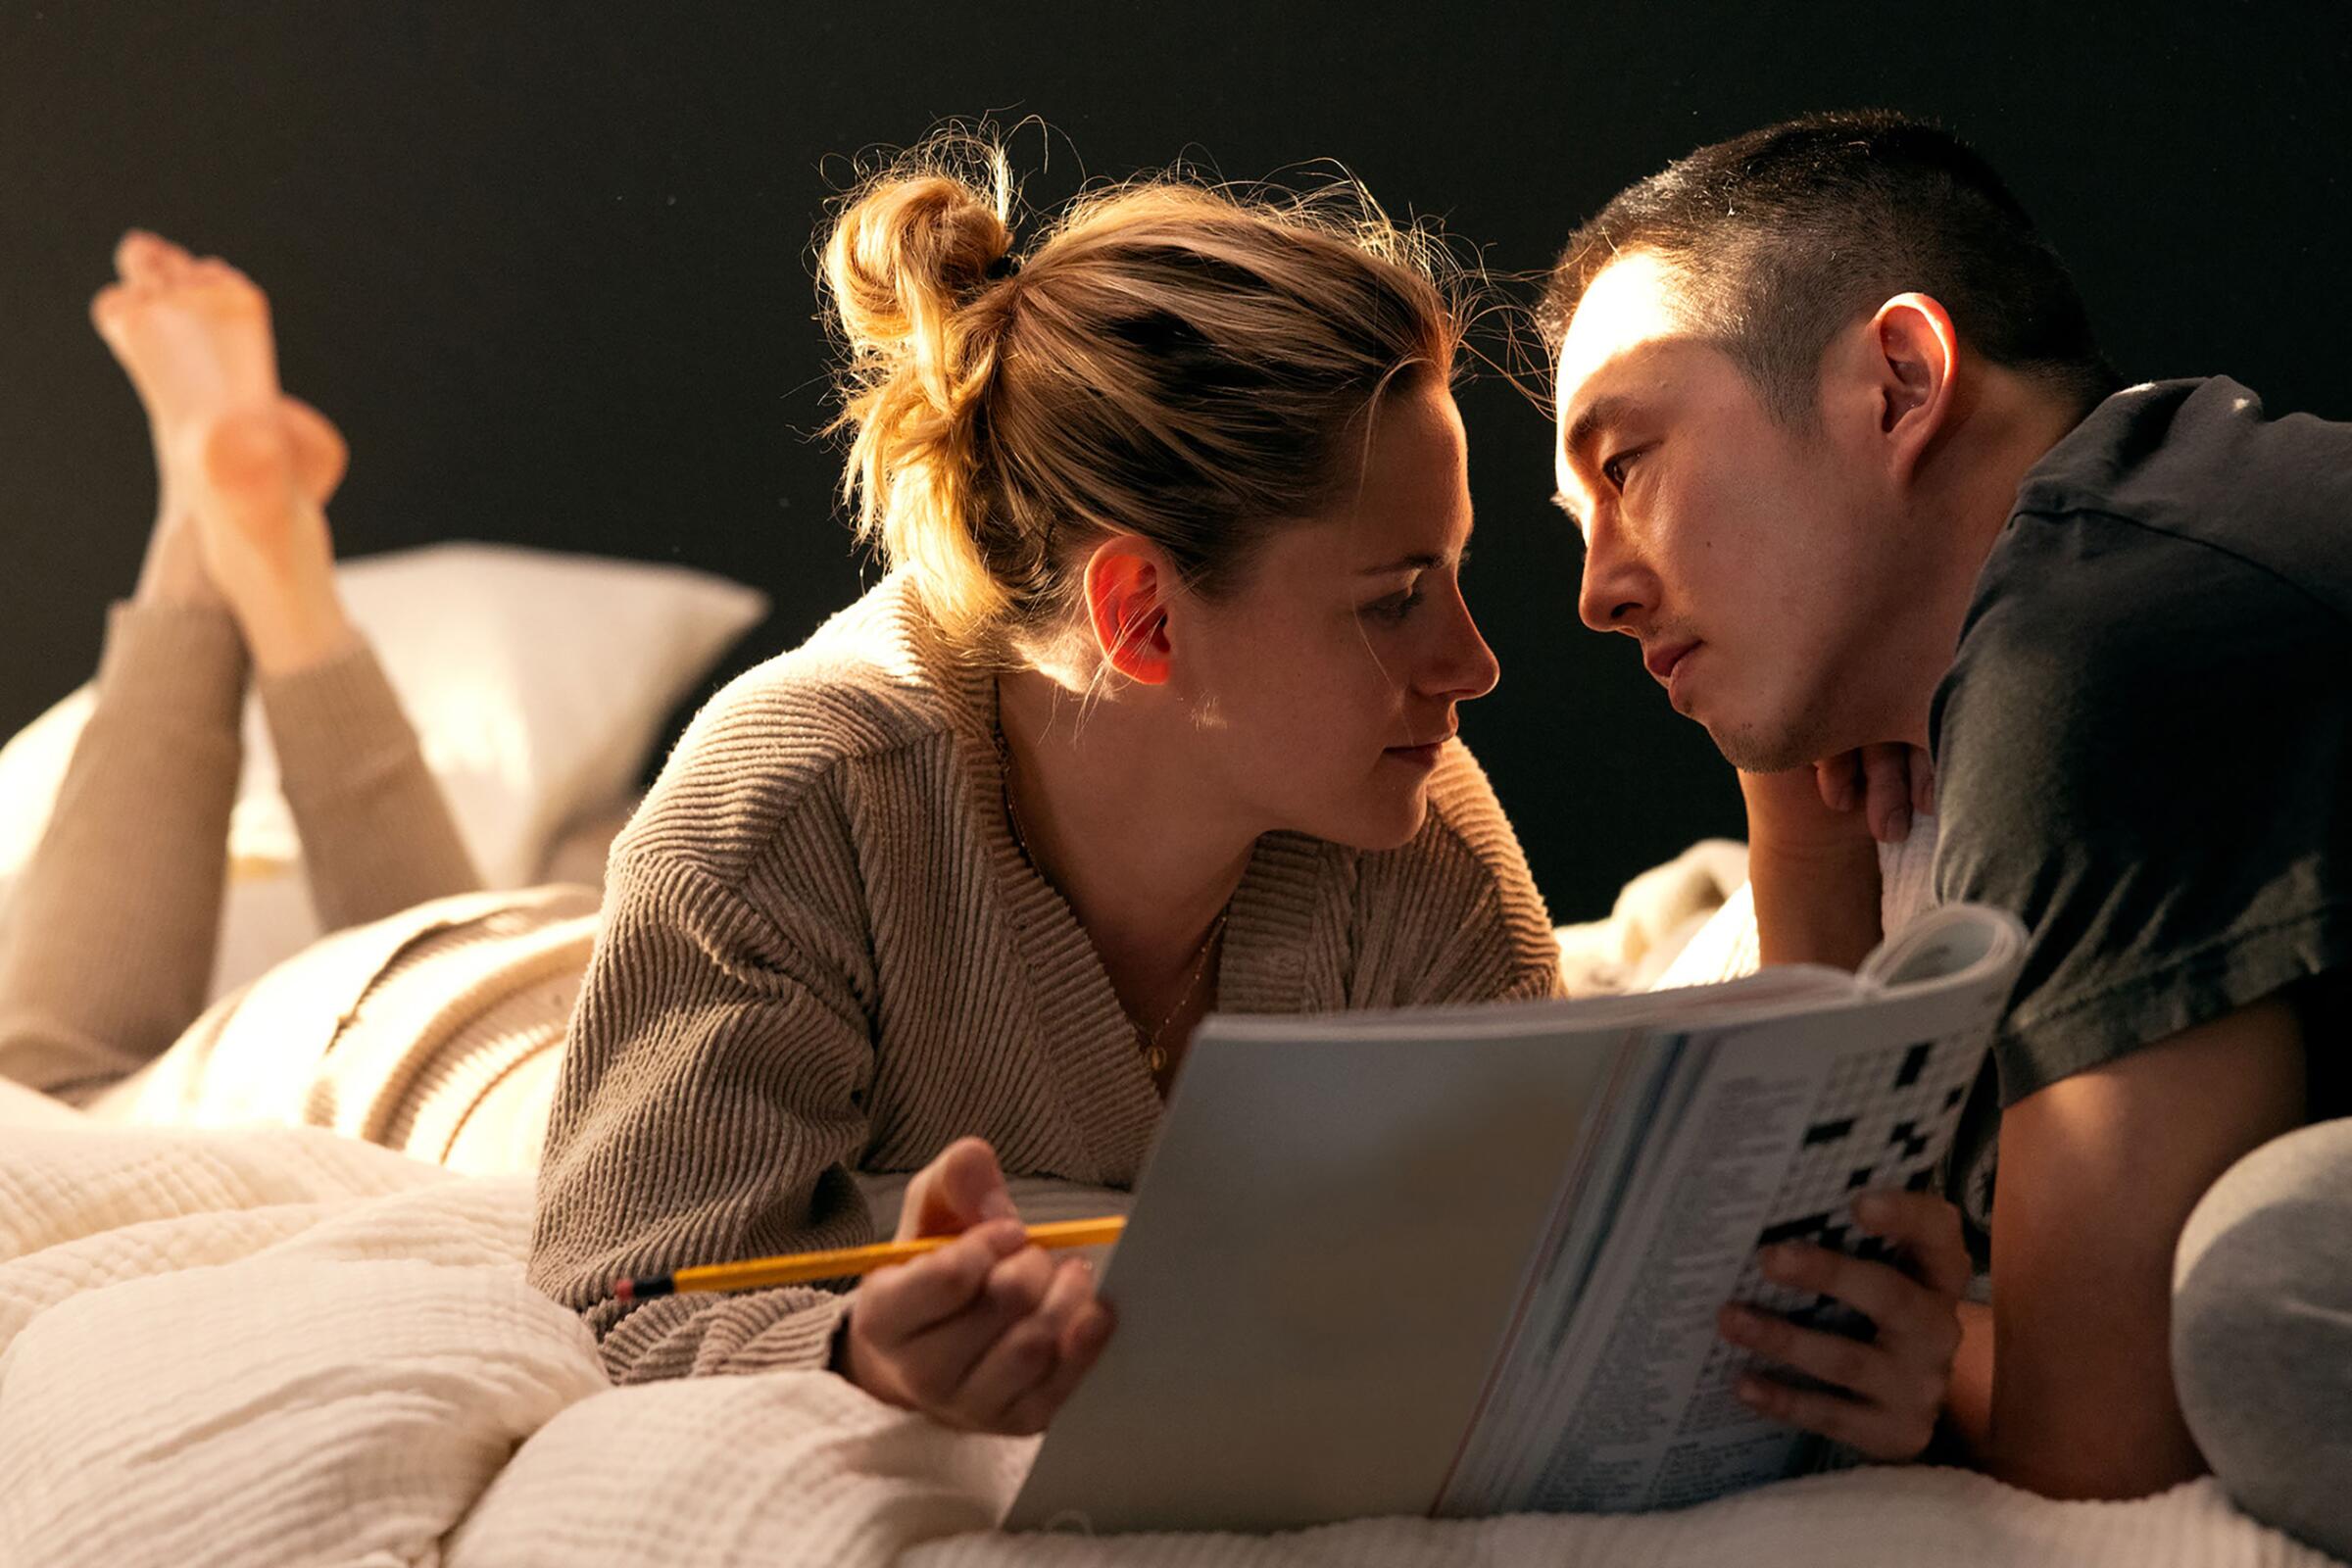 A woman lies on a bed reading a magazine, with a man next to her looking into her face.